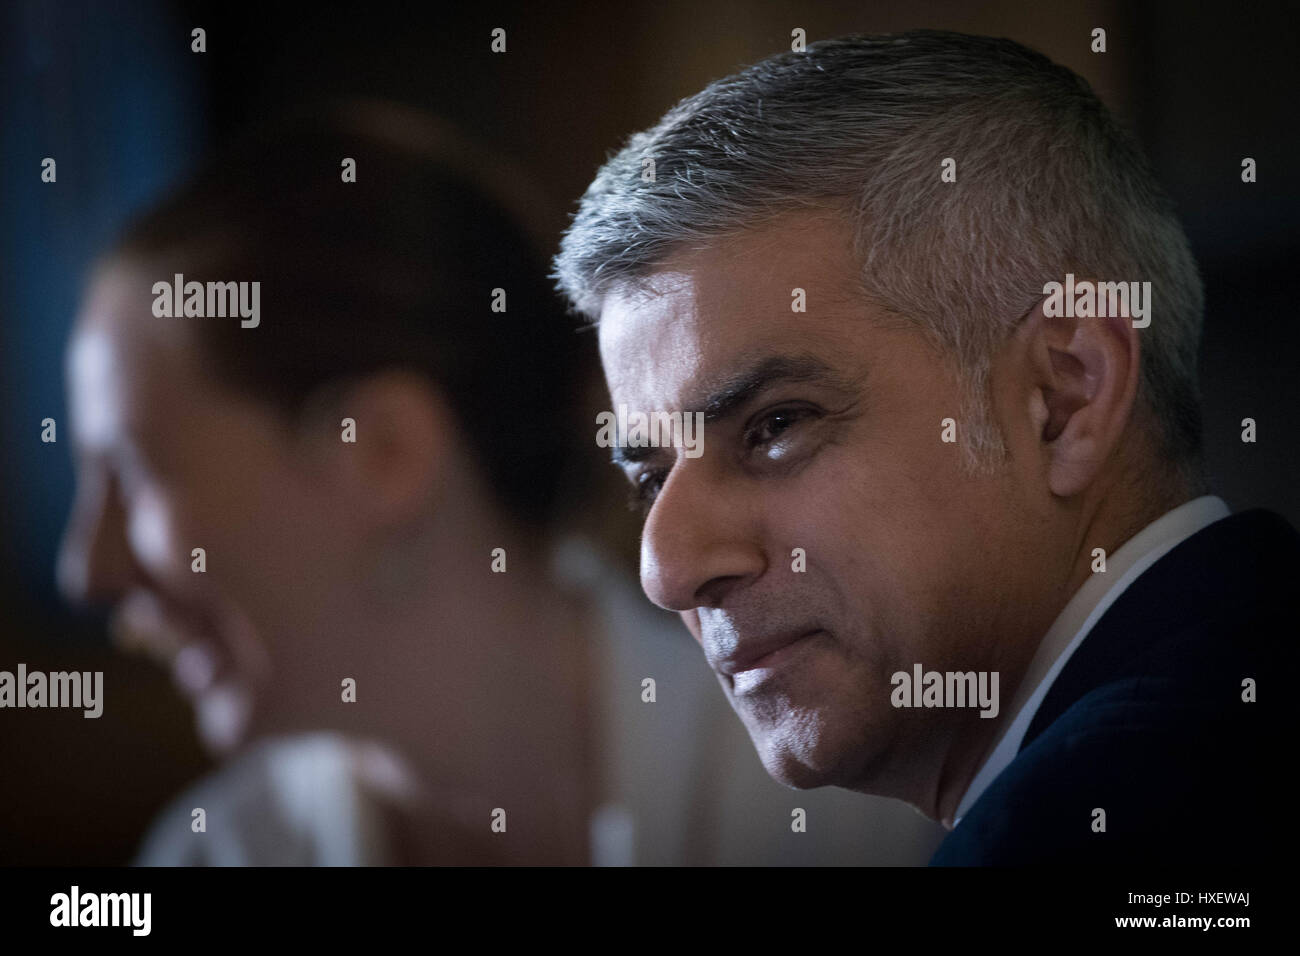 Mayor of London, Sadiq Khan speaking at POLITICO's 'The New European Order' event in Brussels during the mayors three day visit to Paris and Brussels where he will meet EU leaders and officials to talk about Brexit and the recent terror attack in London. Stock Photo